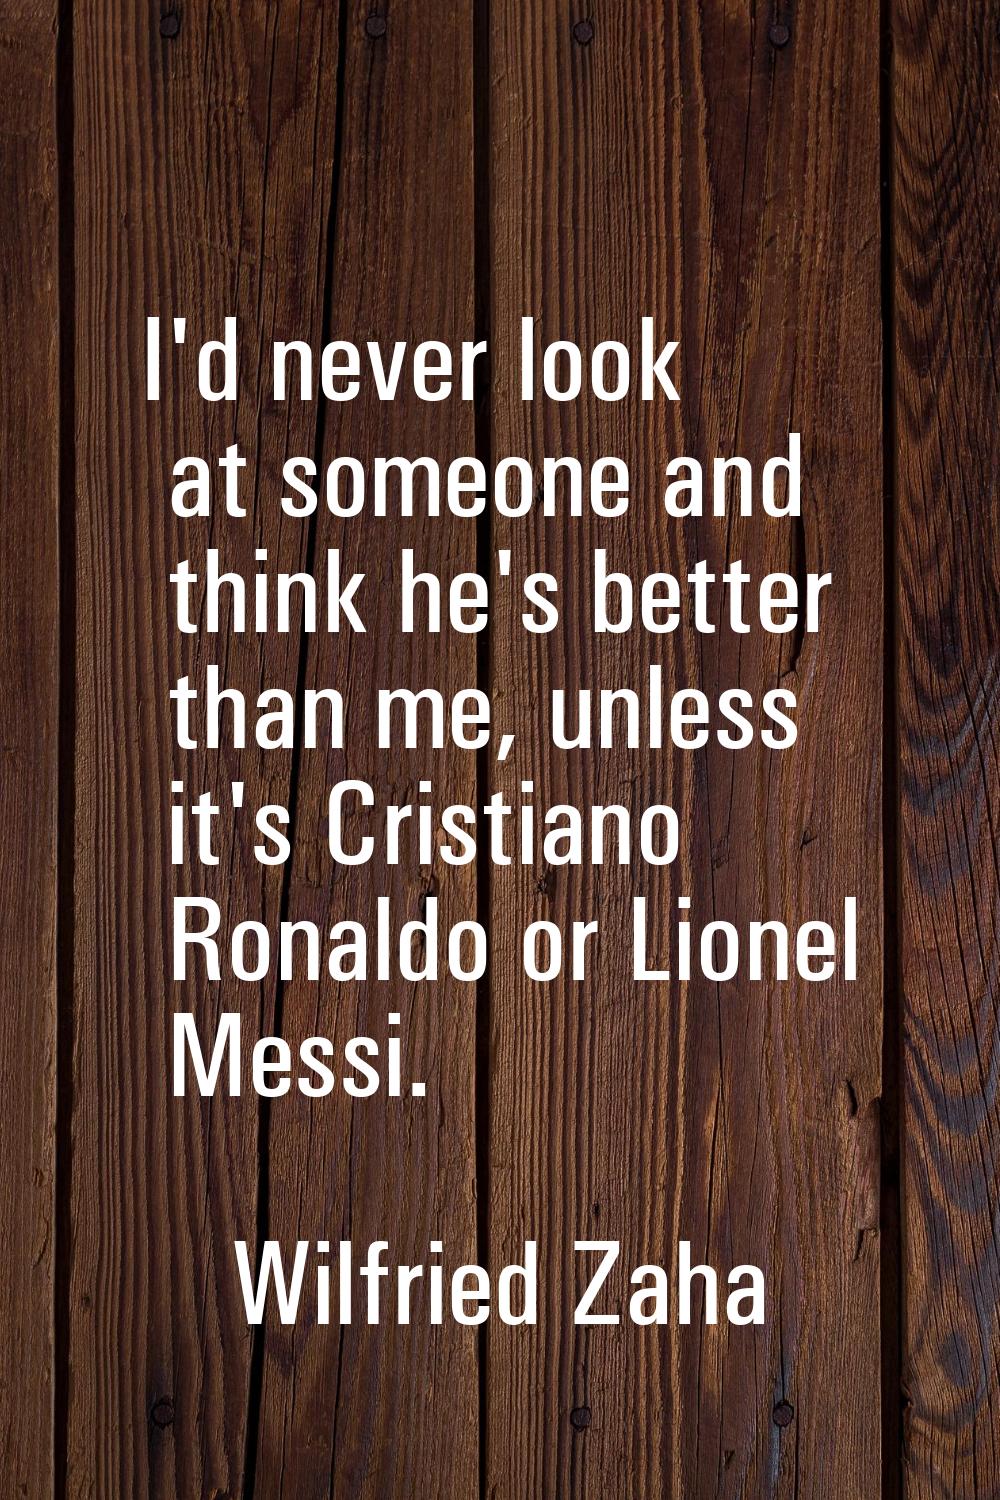 I'd never look at someone and think he's better than me, unless it's Cristiano Ronaldo or Lionel Me